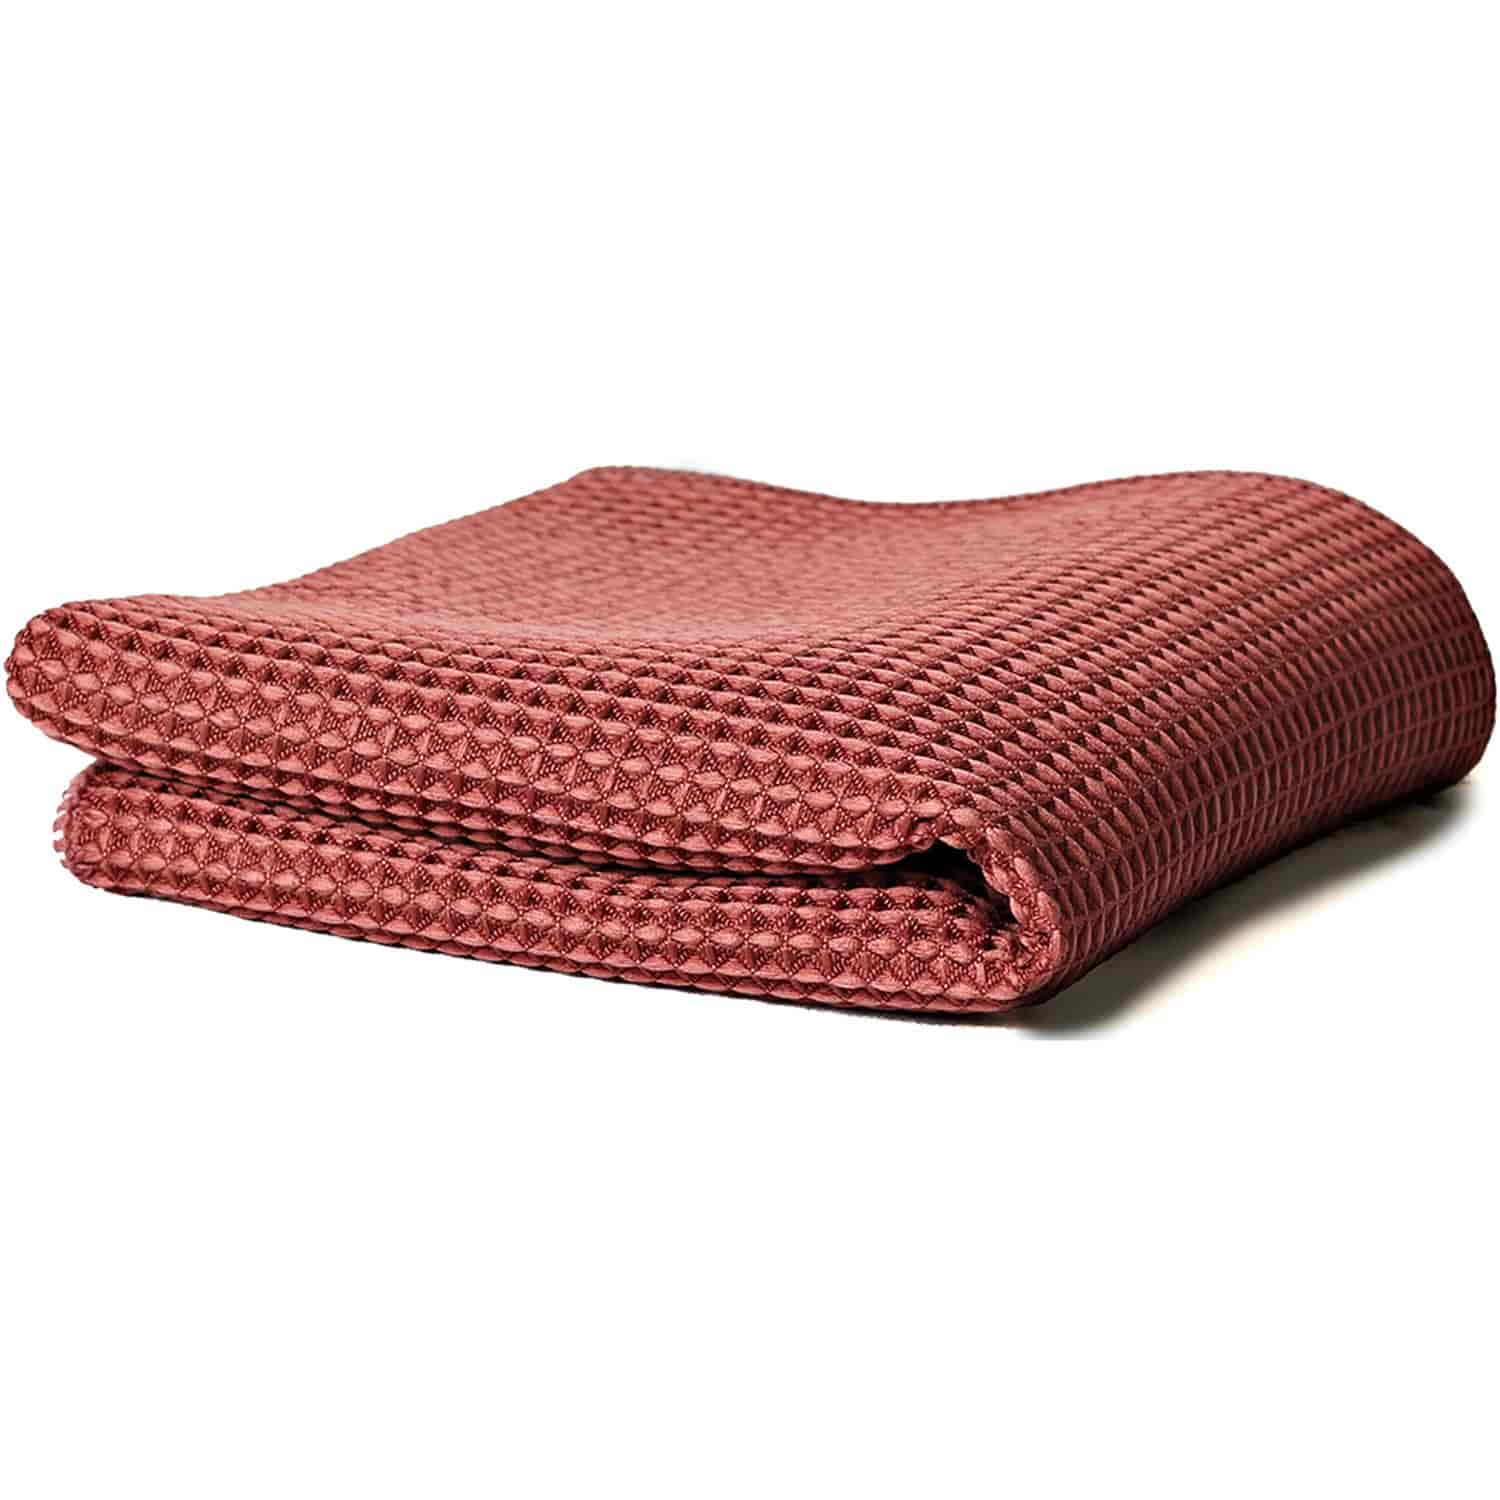 Glass Cleaning Waffle Weave Microfiber Drying Towel 15" x 25"